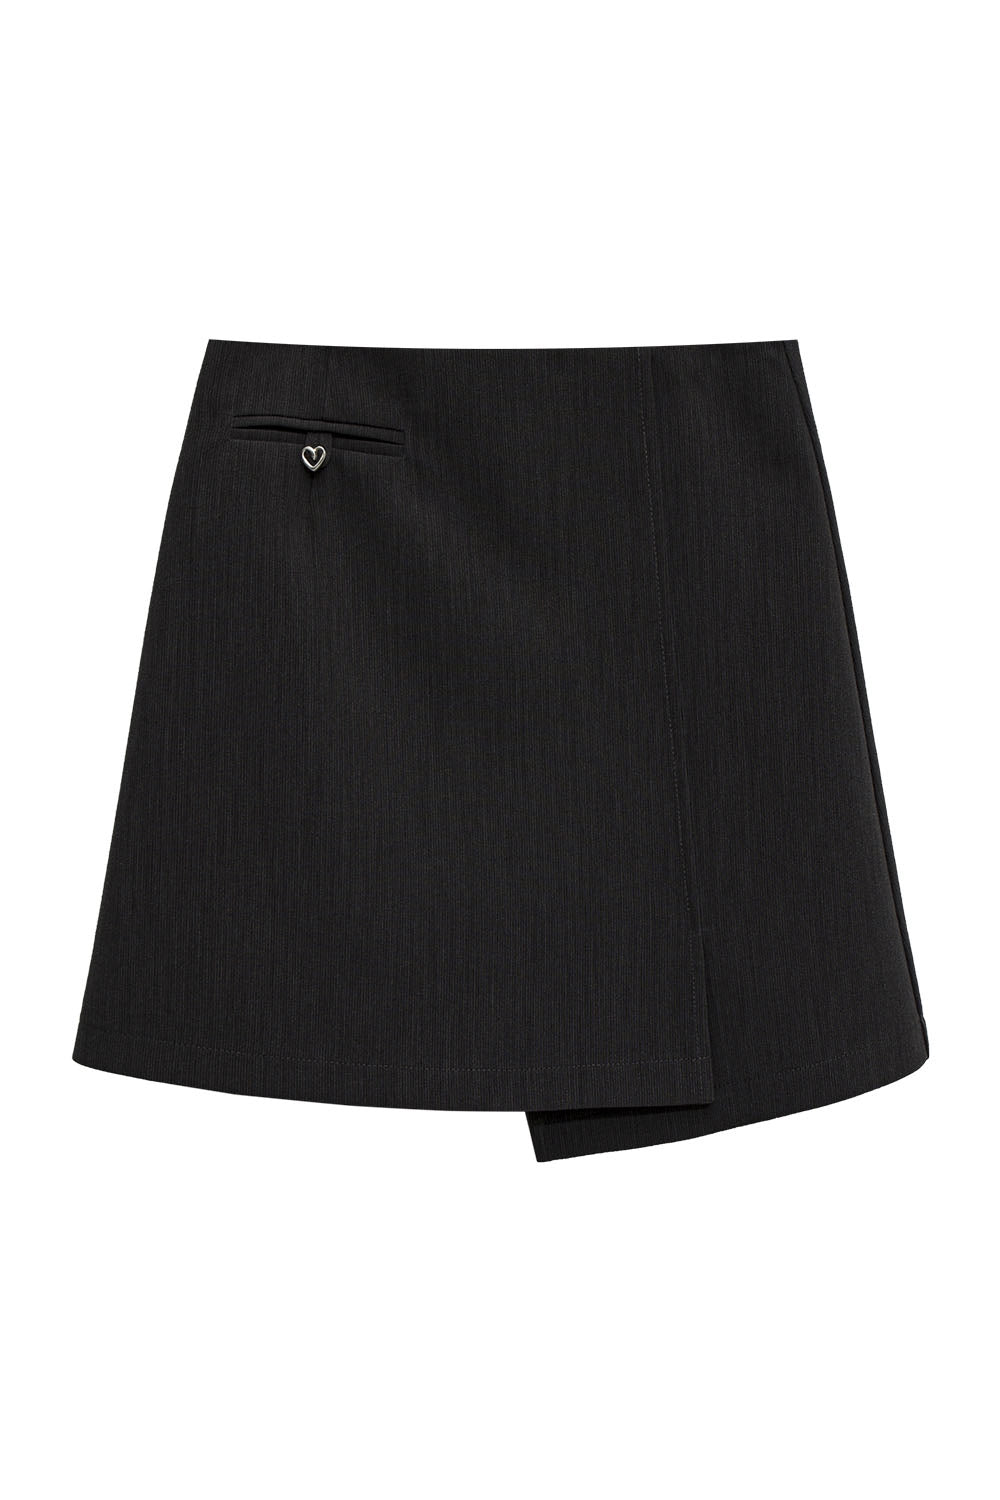 Women's Tailored Mini Skirt with Front Pocket Detail